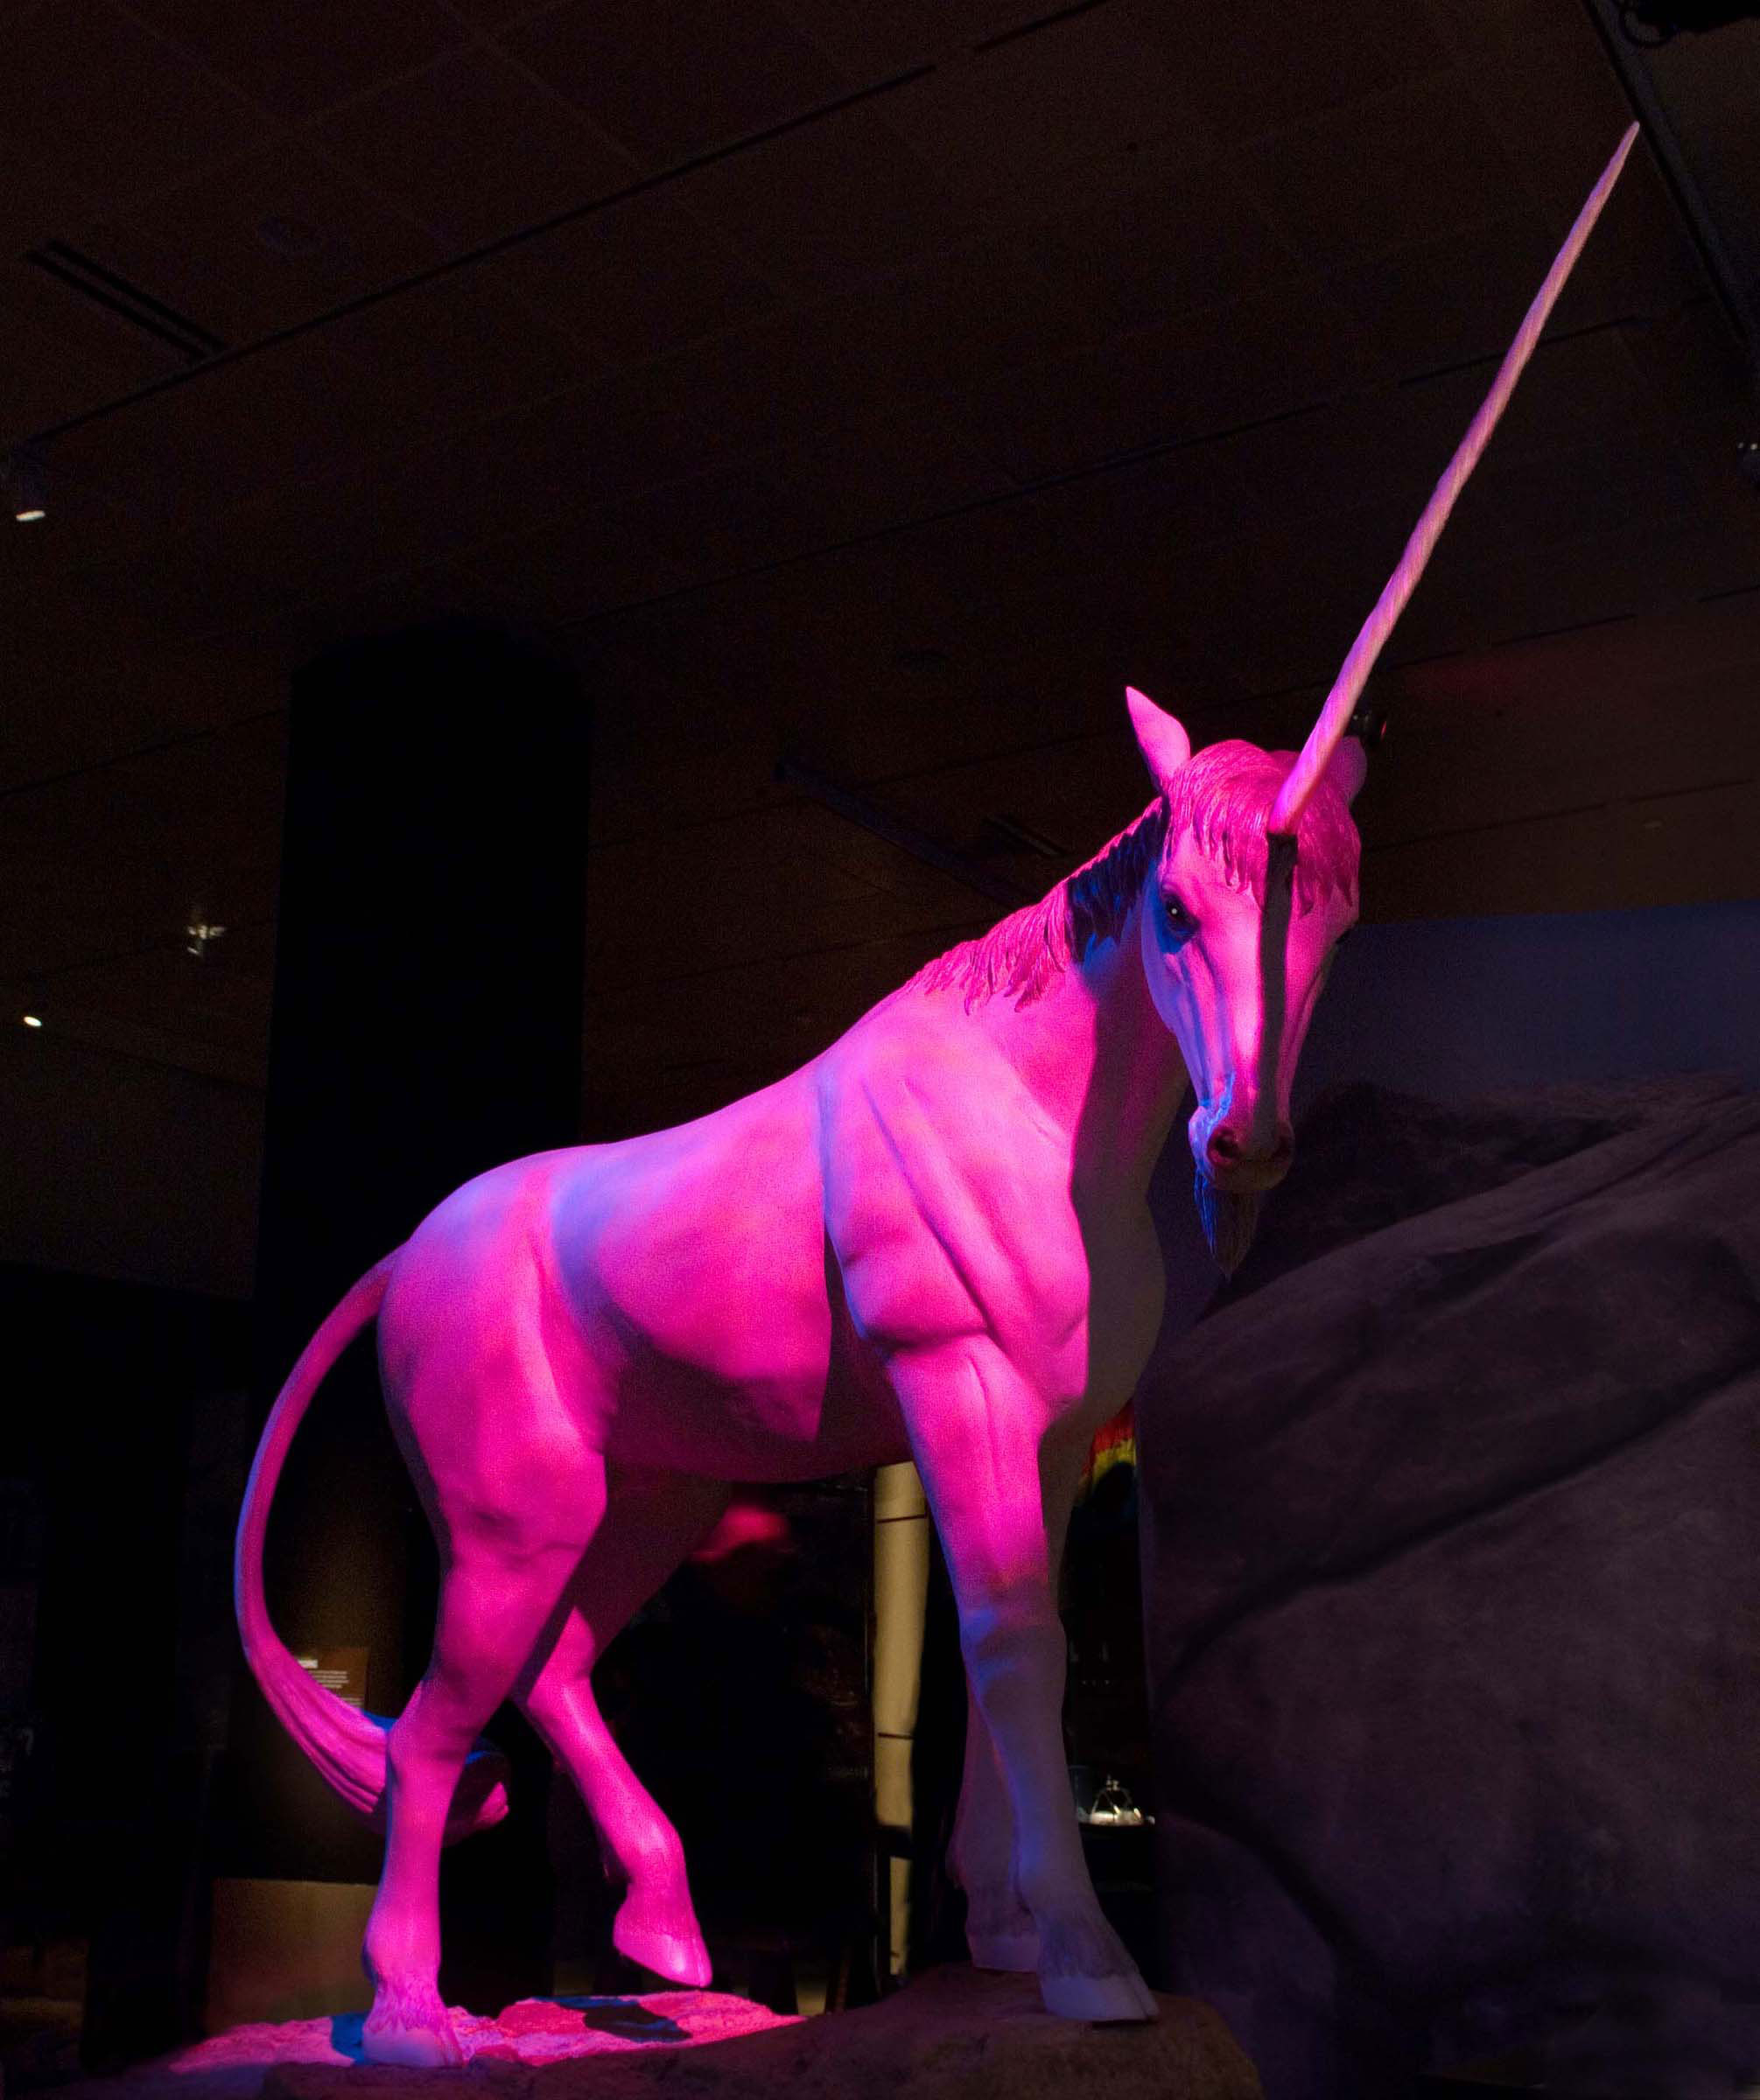 This white unicorn bathed in violet light, 10 feet long from tail to tip of horn, is featured in the special exhibition. © AMNH/D. Finnin